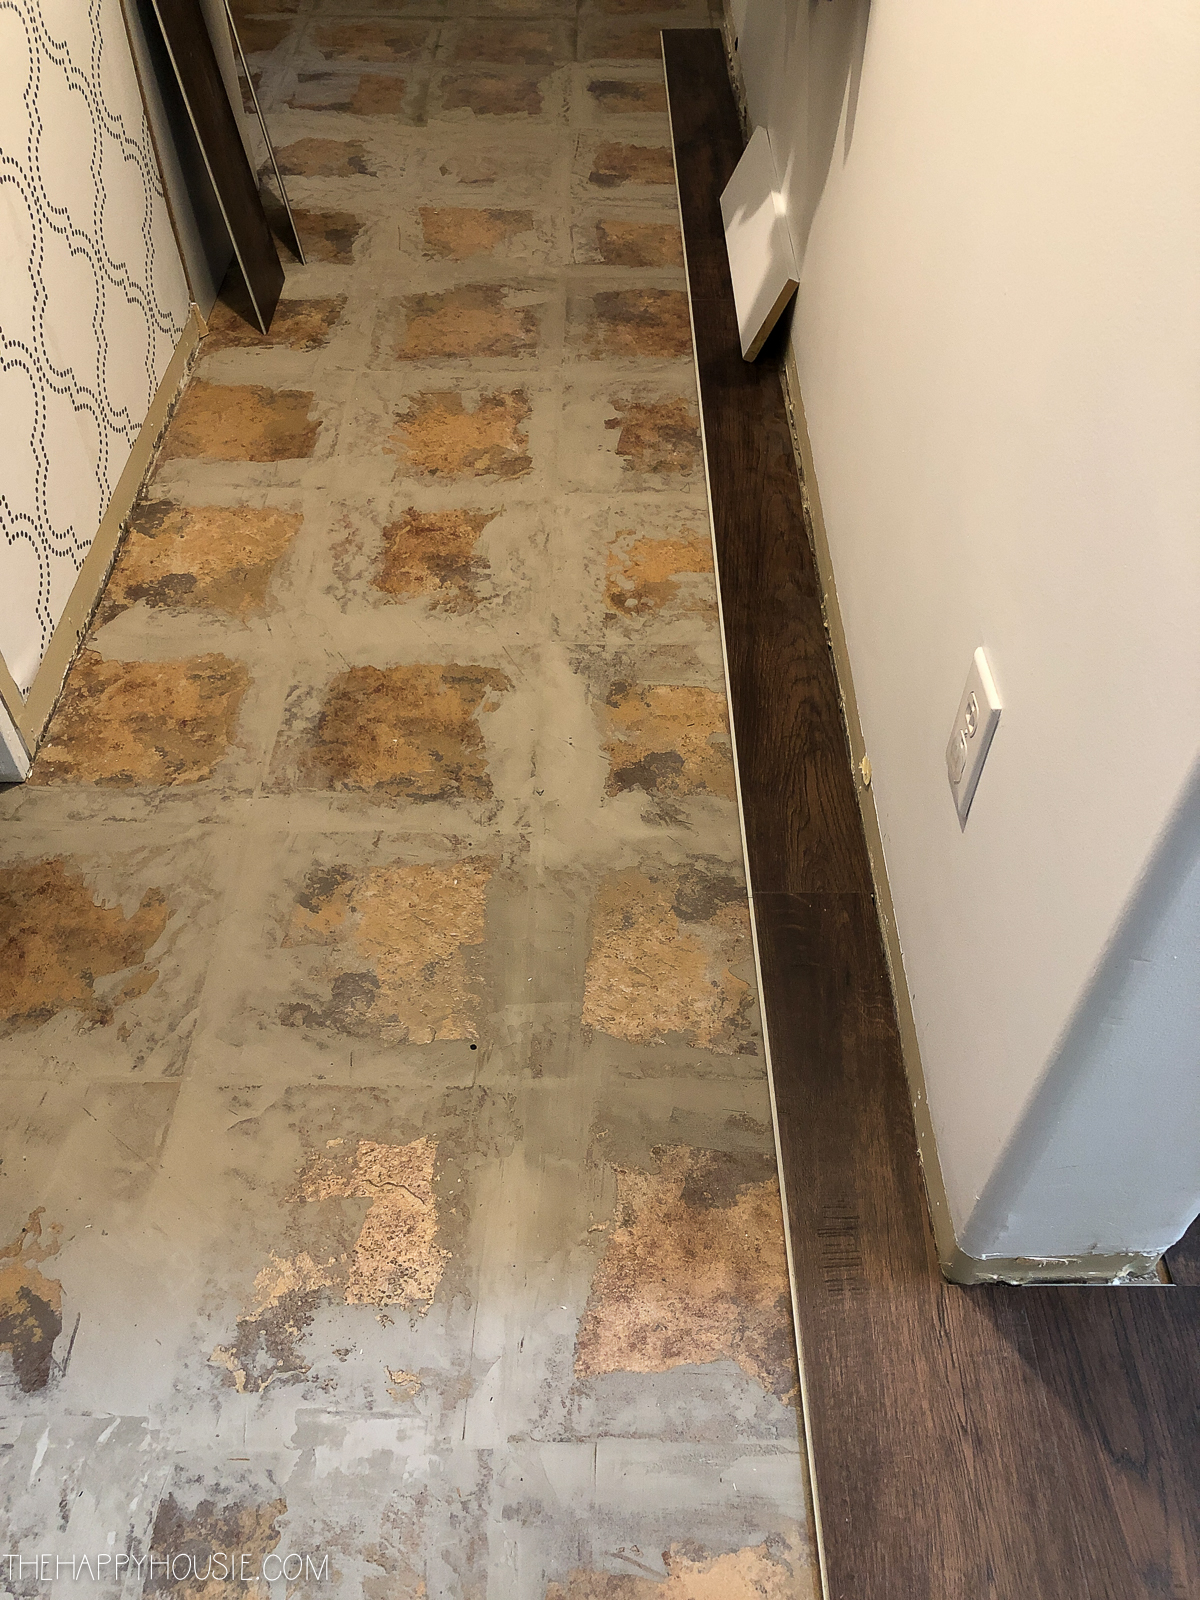 Install Vinyl Plank Over Tile Floors, What Is The Best Flooring To Put Over Tiles